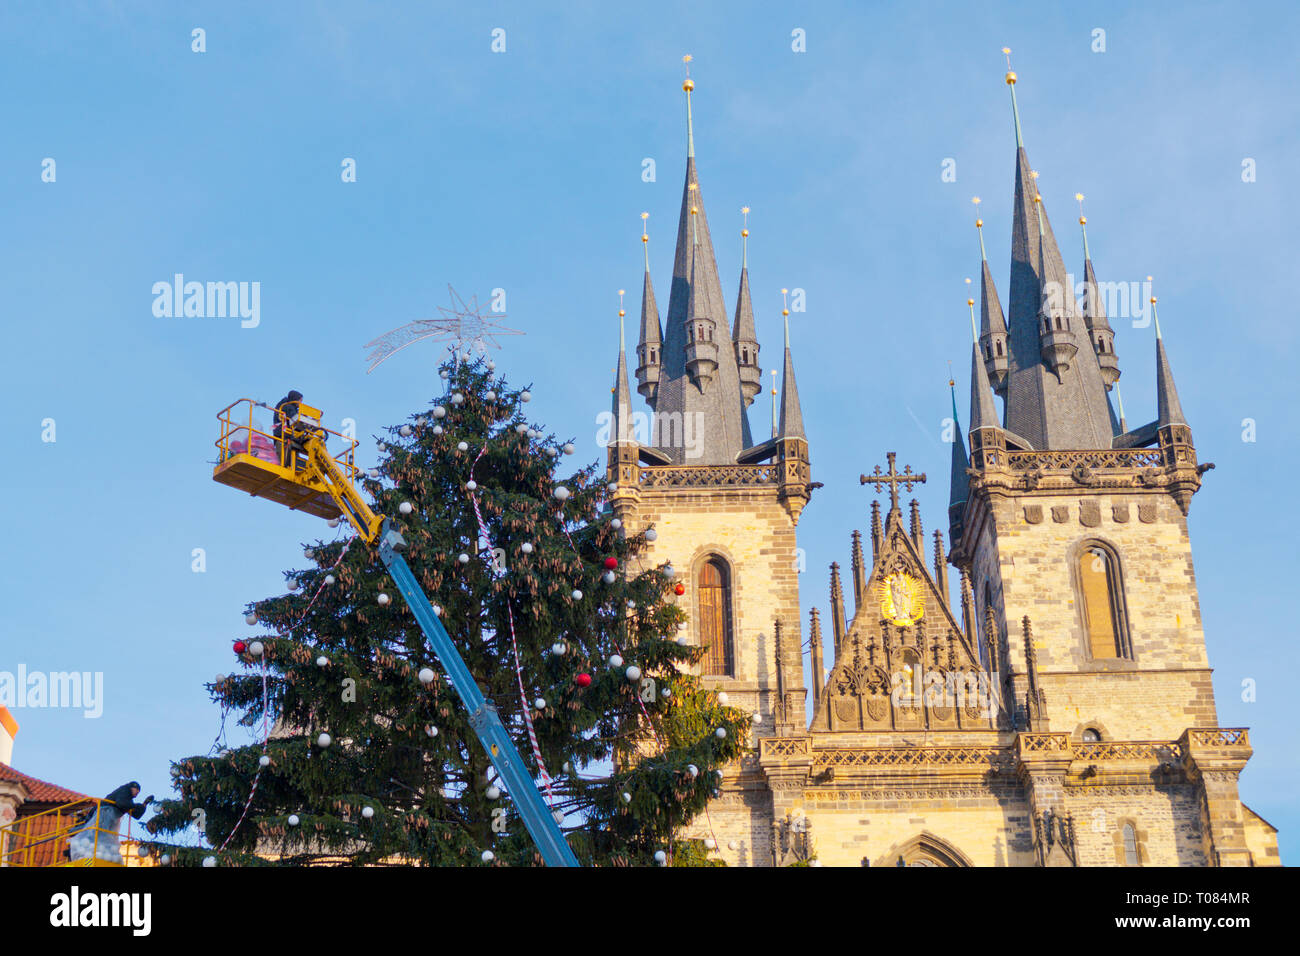 Christmas tree being decorated, old town square, Prague, Czech Republic Stock Photo